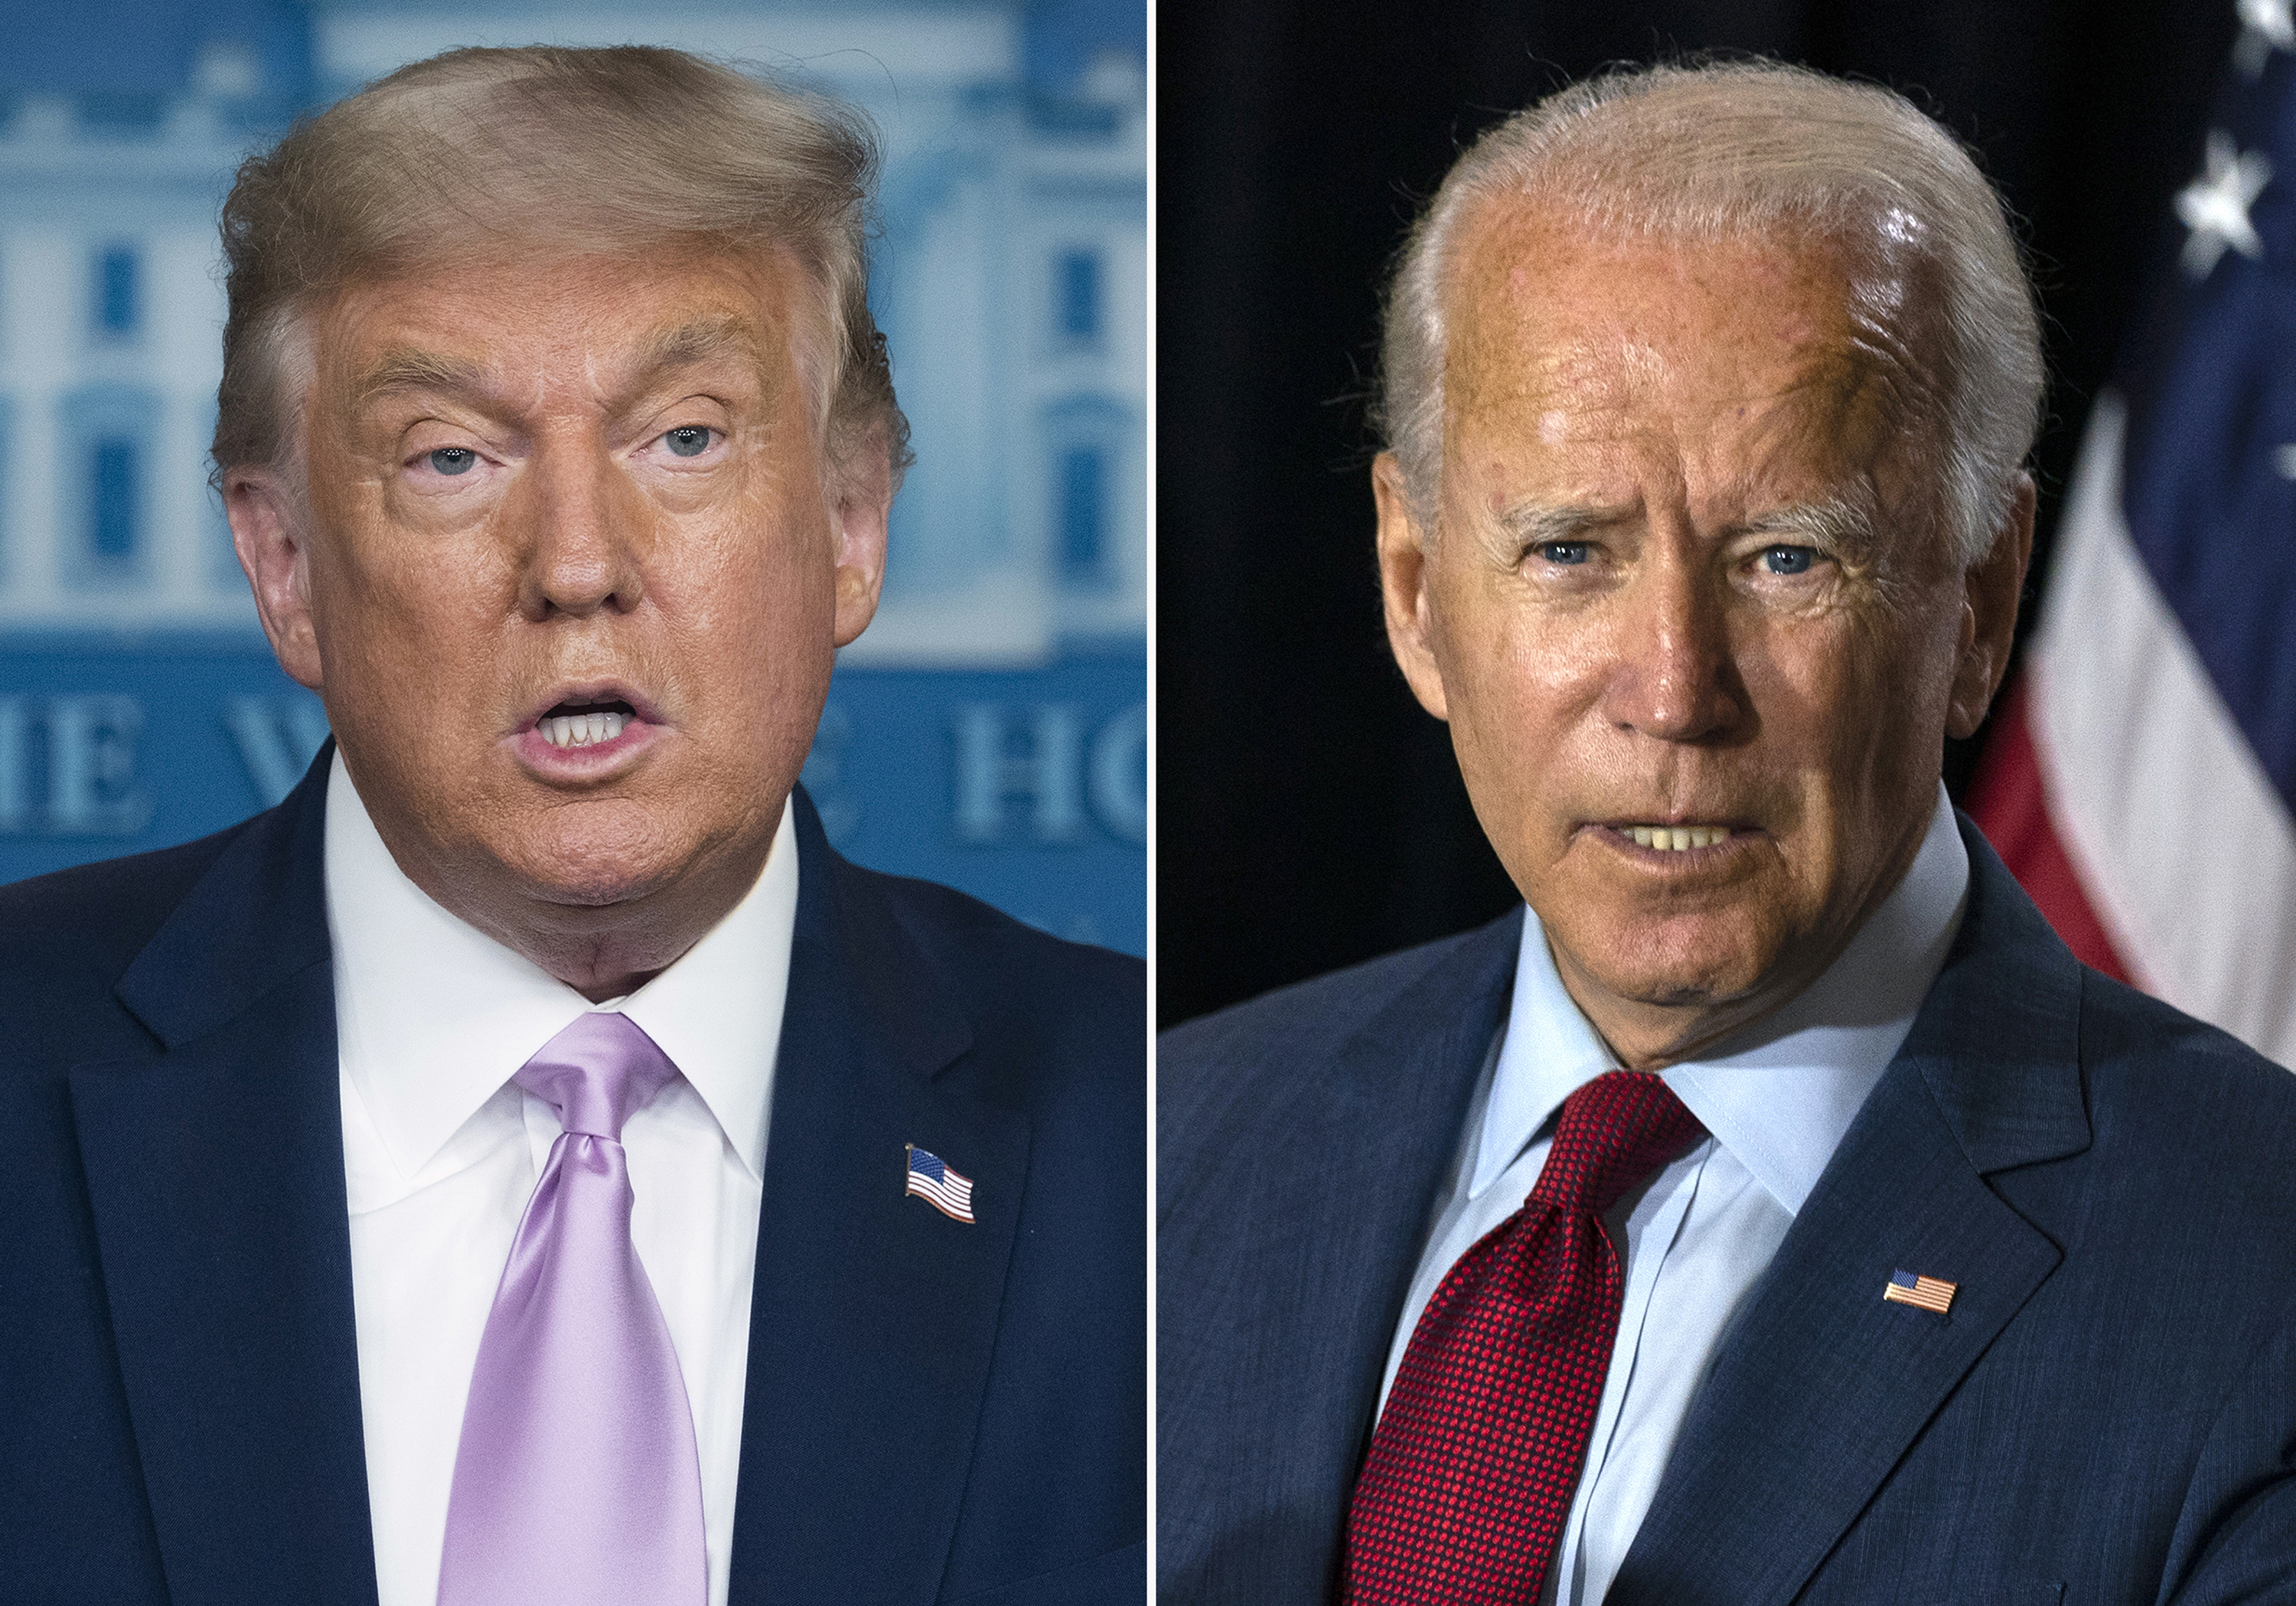 are the CEOs and companies support Trump...and Biden